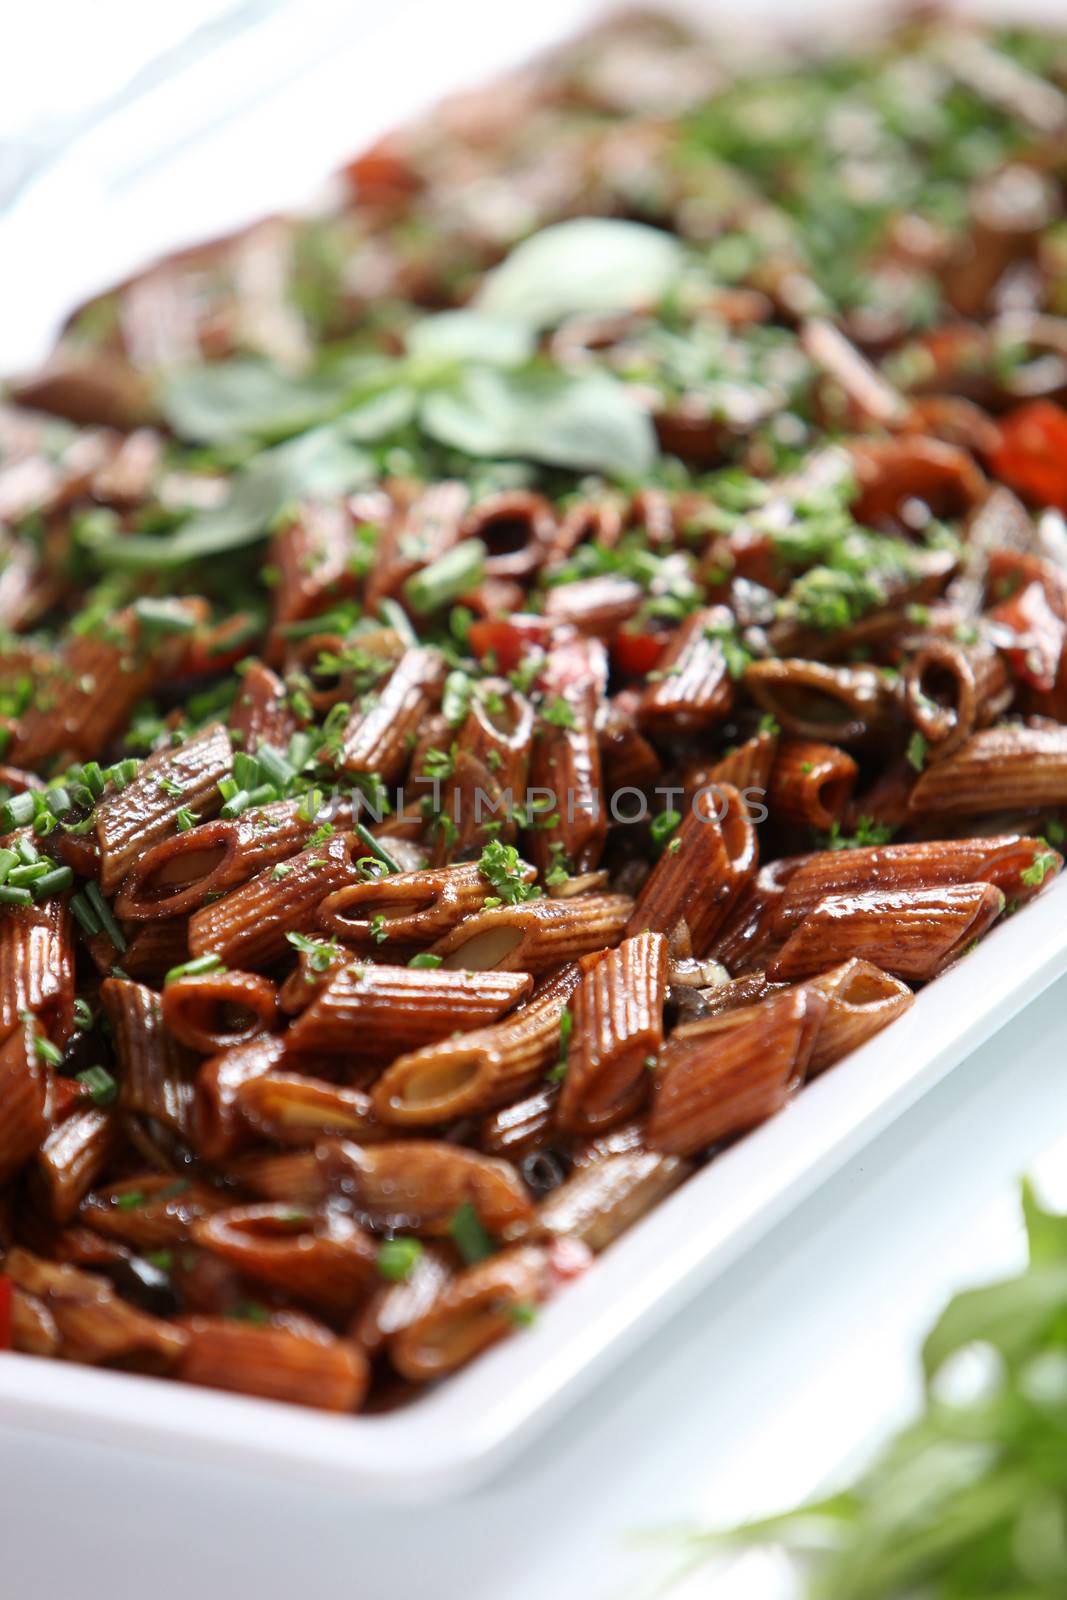 Wholewheat pasta dish with fresh herbs served on a buffet table, close up view with shallow dof